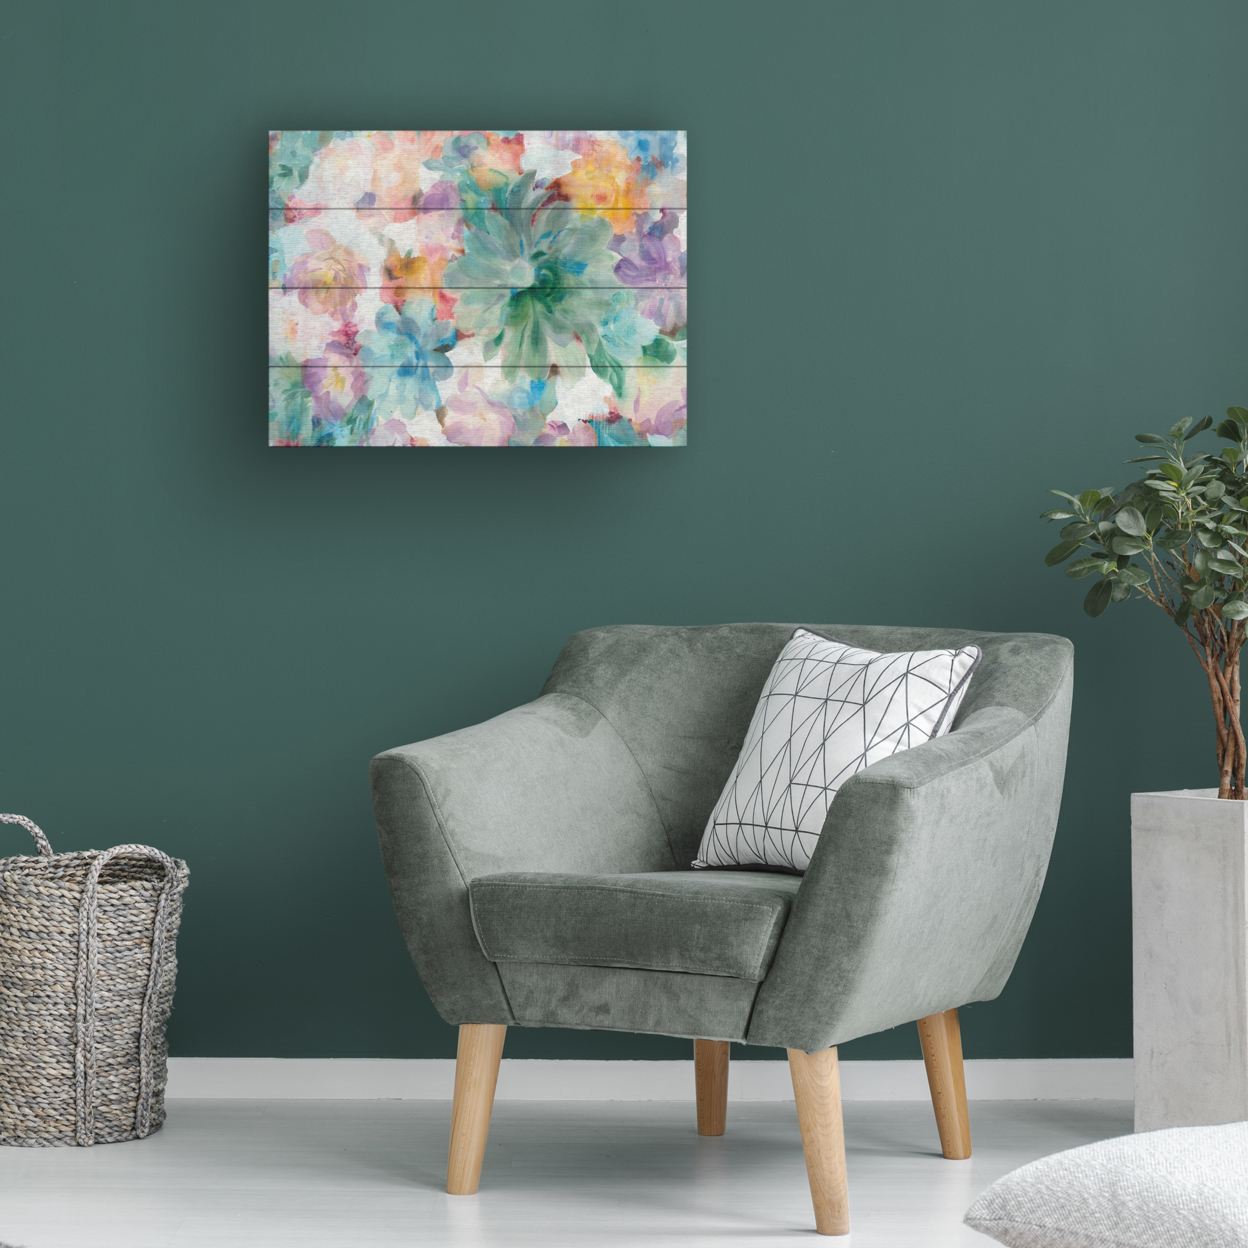 Wall Art 12 X 16 Inches Titled Succulent Florals Crop Ready To Hang Printed On Wooden Planks